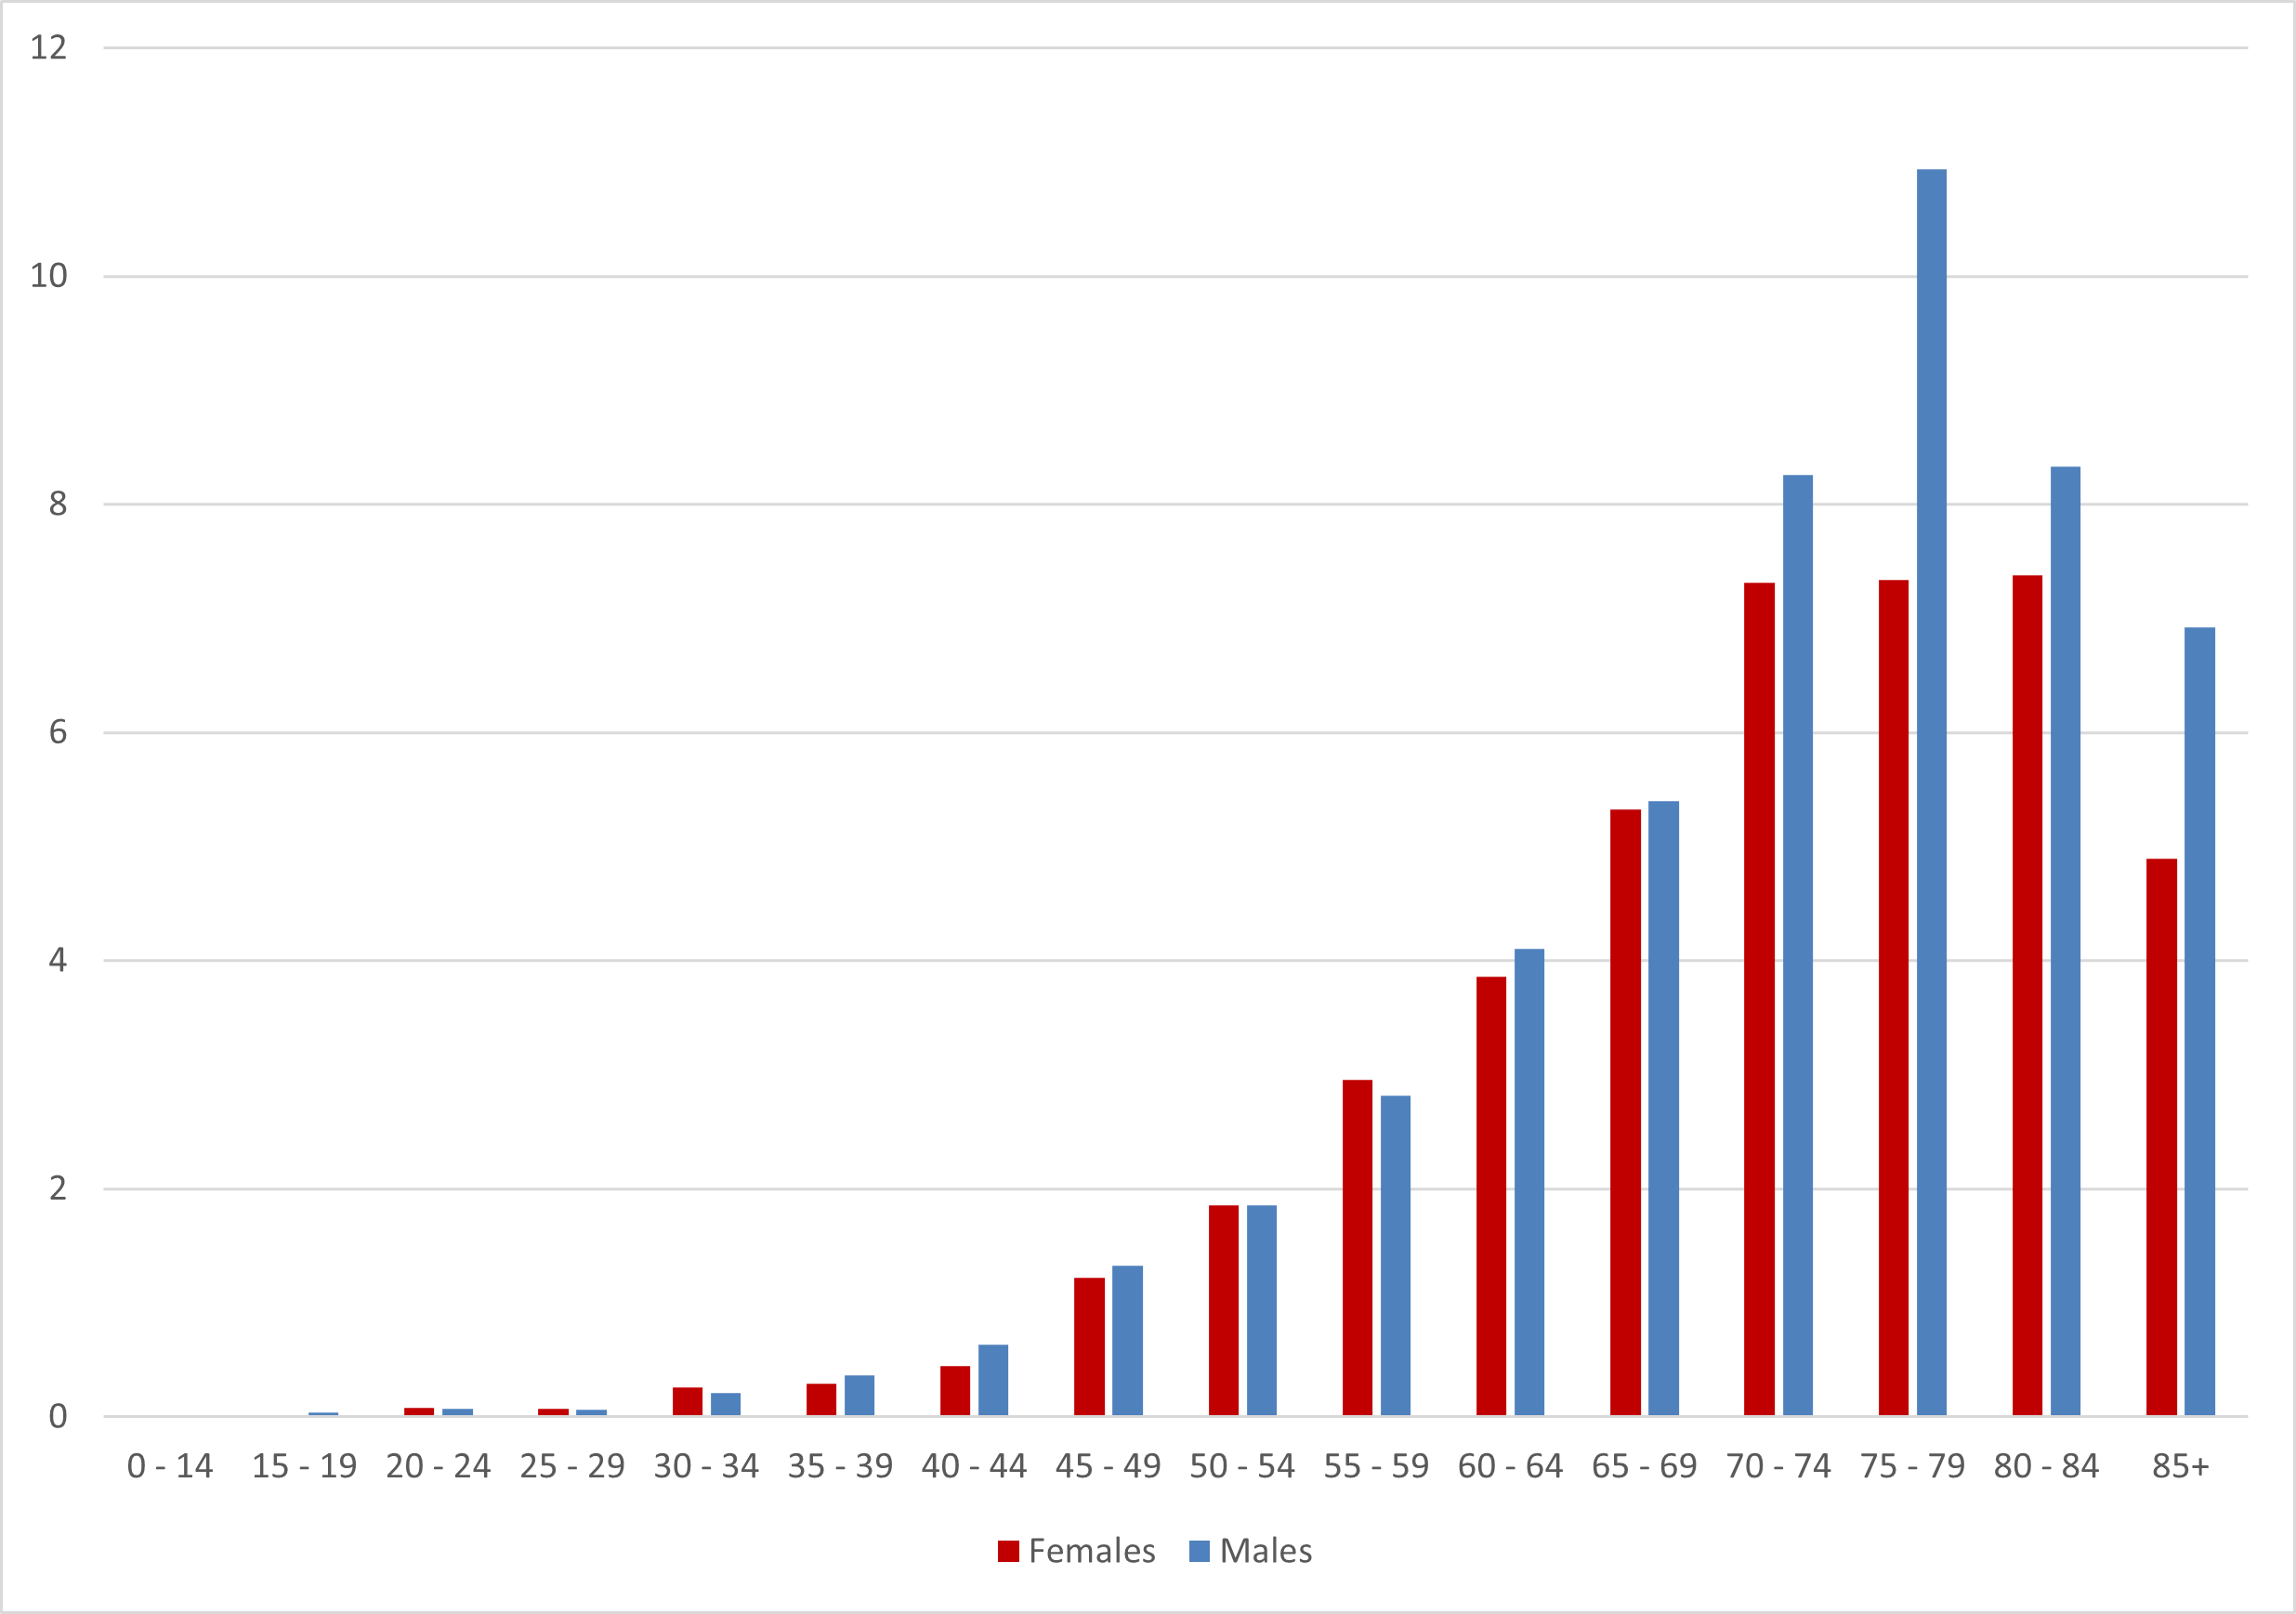 Annual rates of GIST disease by age and sex (2016-2018, per 100,000 persons)